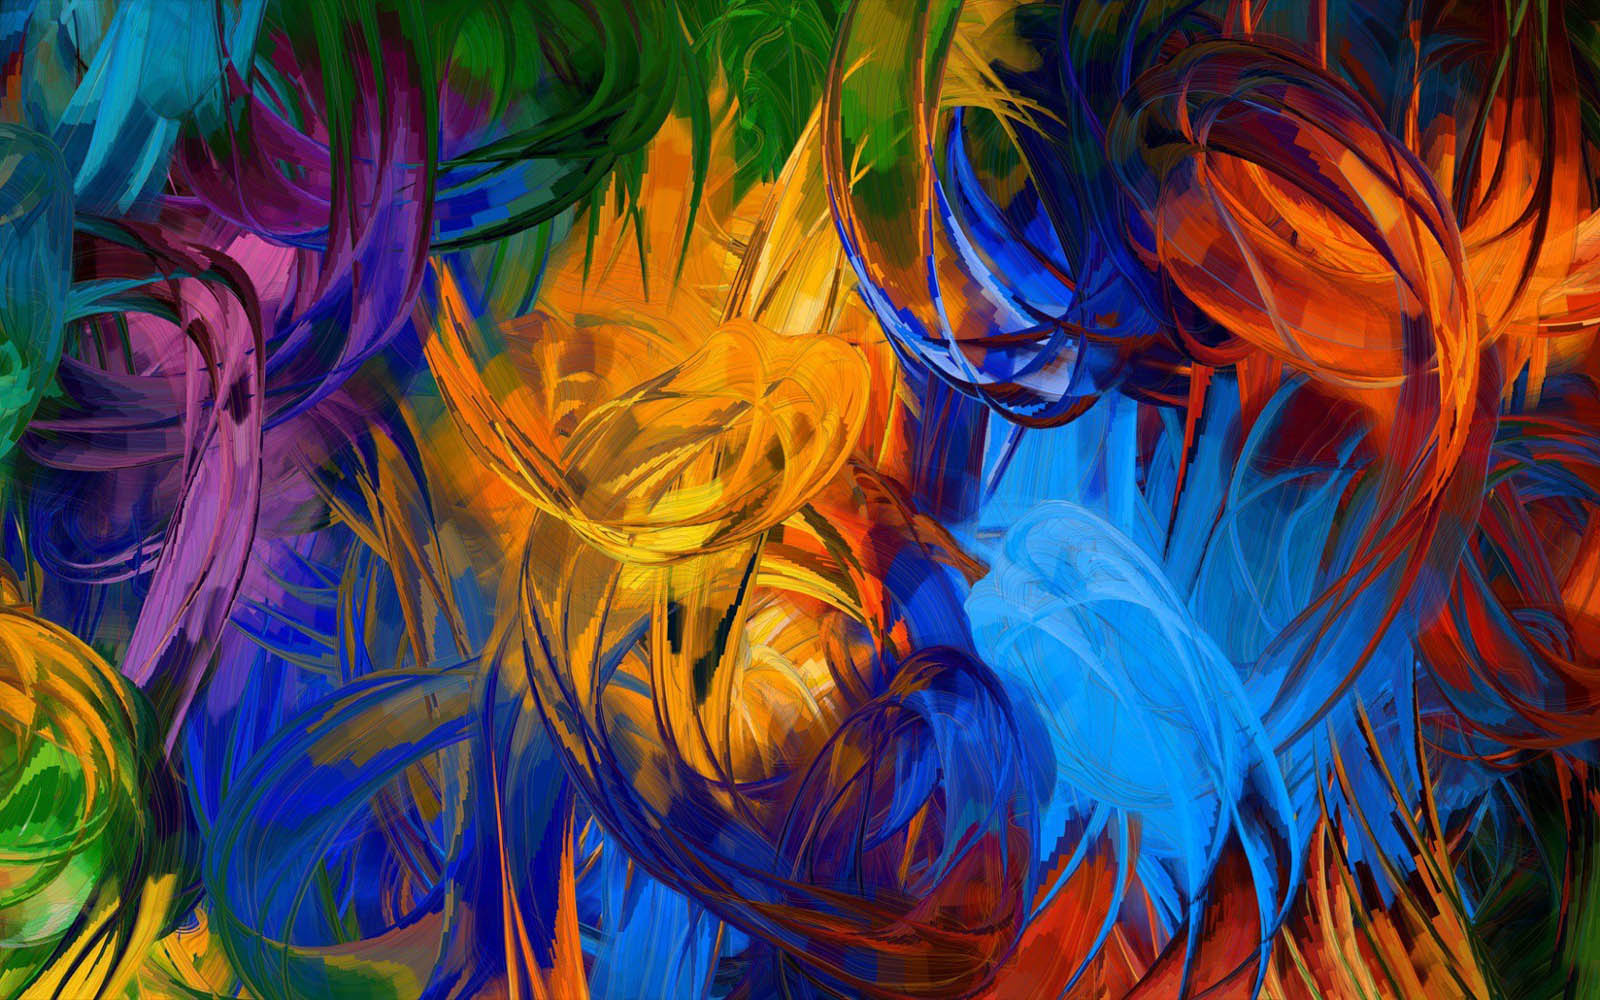  Abstract Paintings Wallpapers AbstractPaintings Desktop Wallpapers 1600x1000